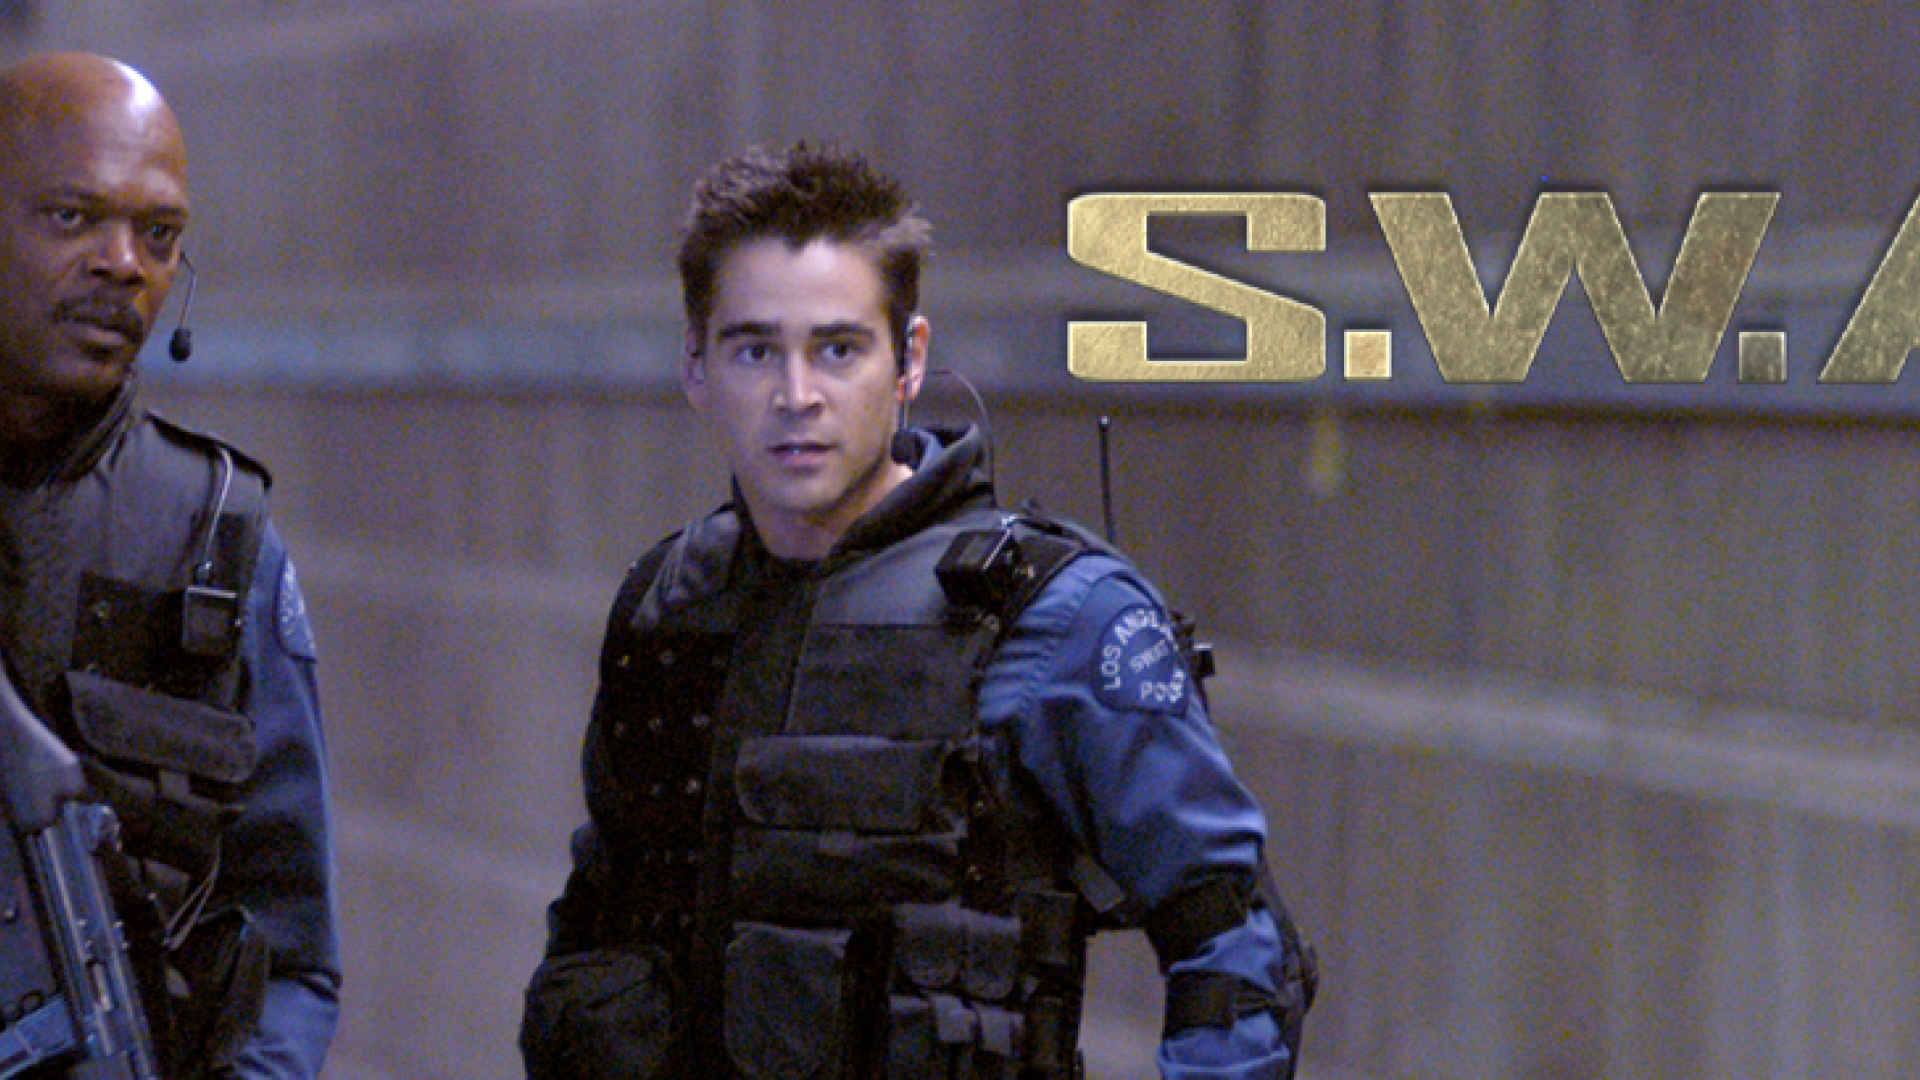  S.W.A.T. : Movies & TV